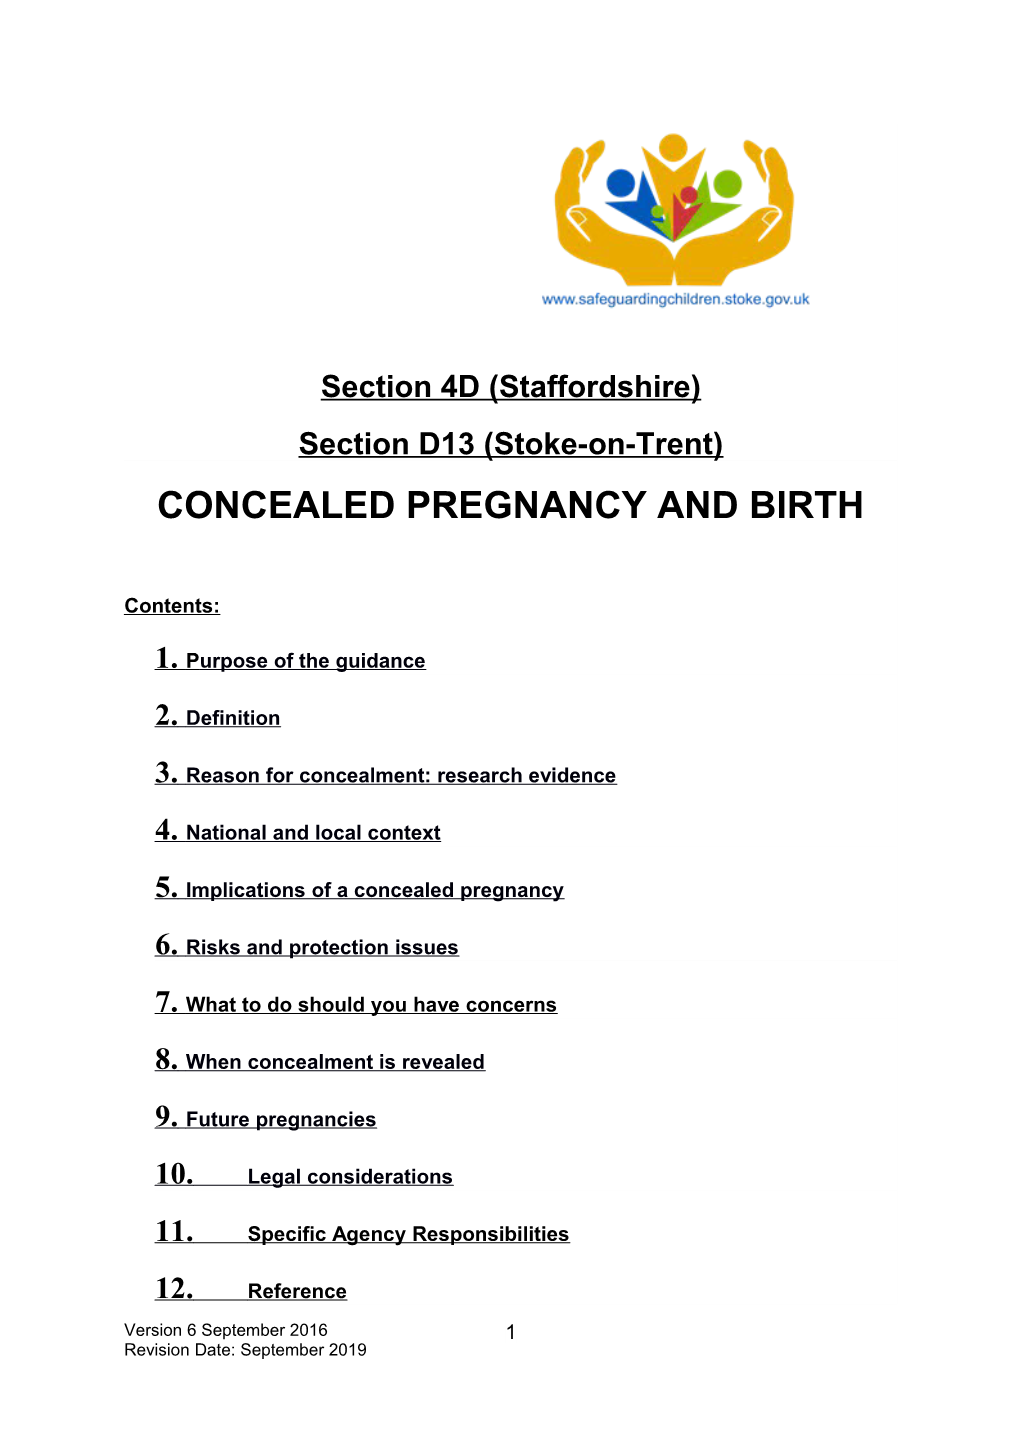 Section 4D Concealed Pregnancy and Birth